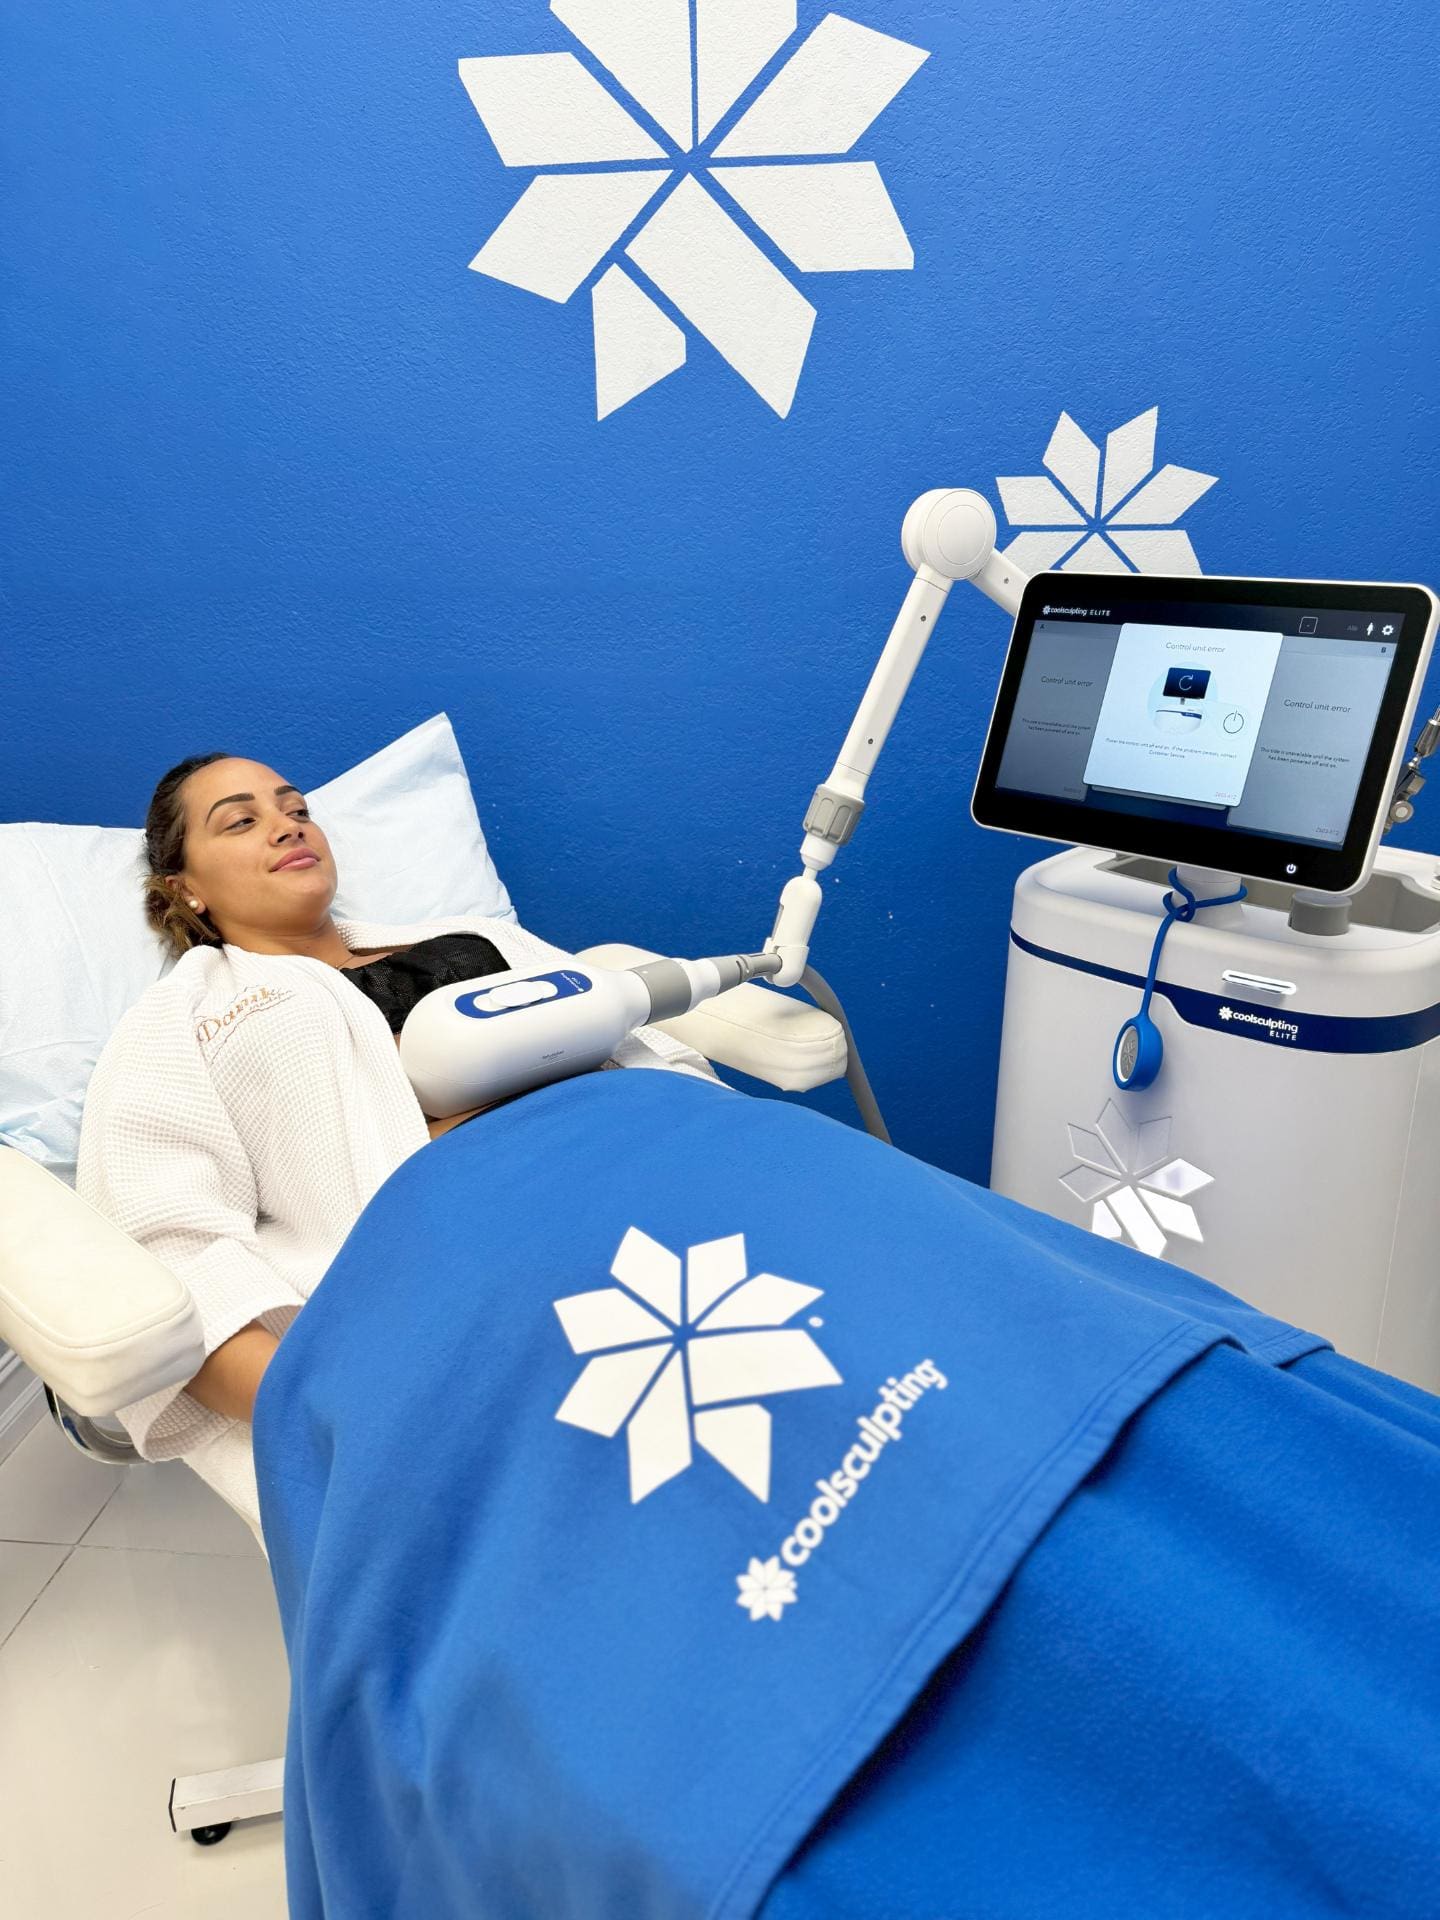 Woman Receiving CoolSculpting Treatment Laying On A Bed With A Blue CoolSculpting Blanket On Her And A Monitor To Her Right